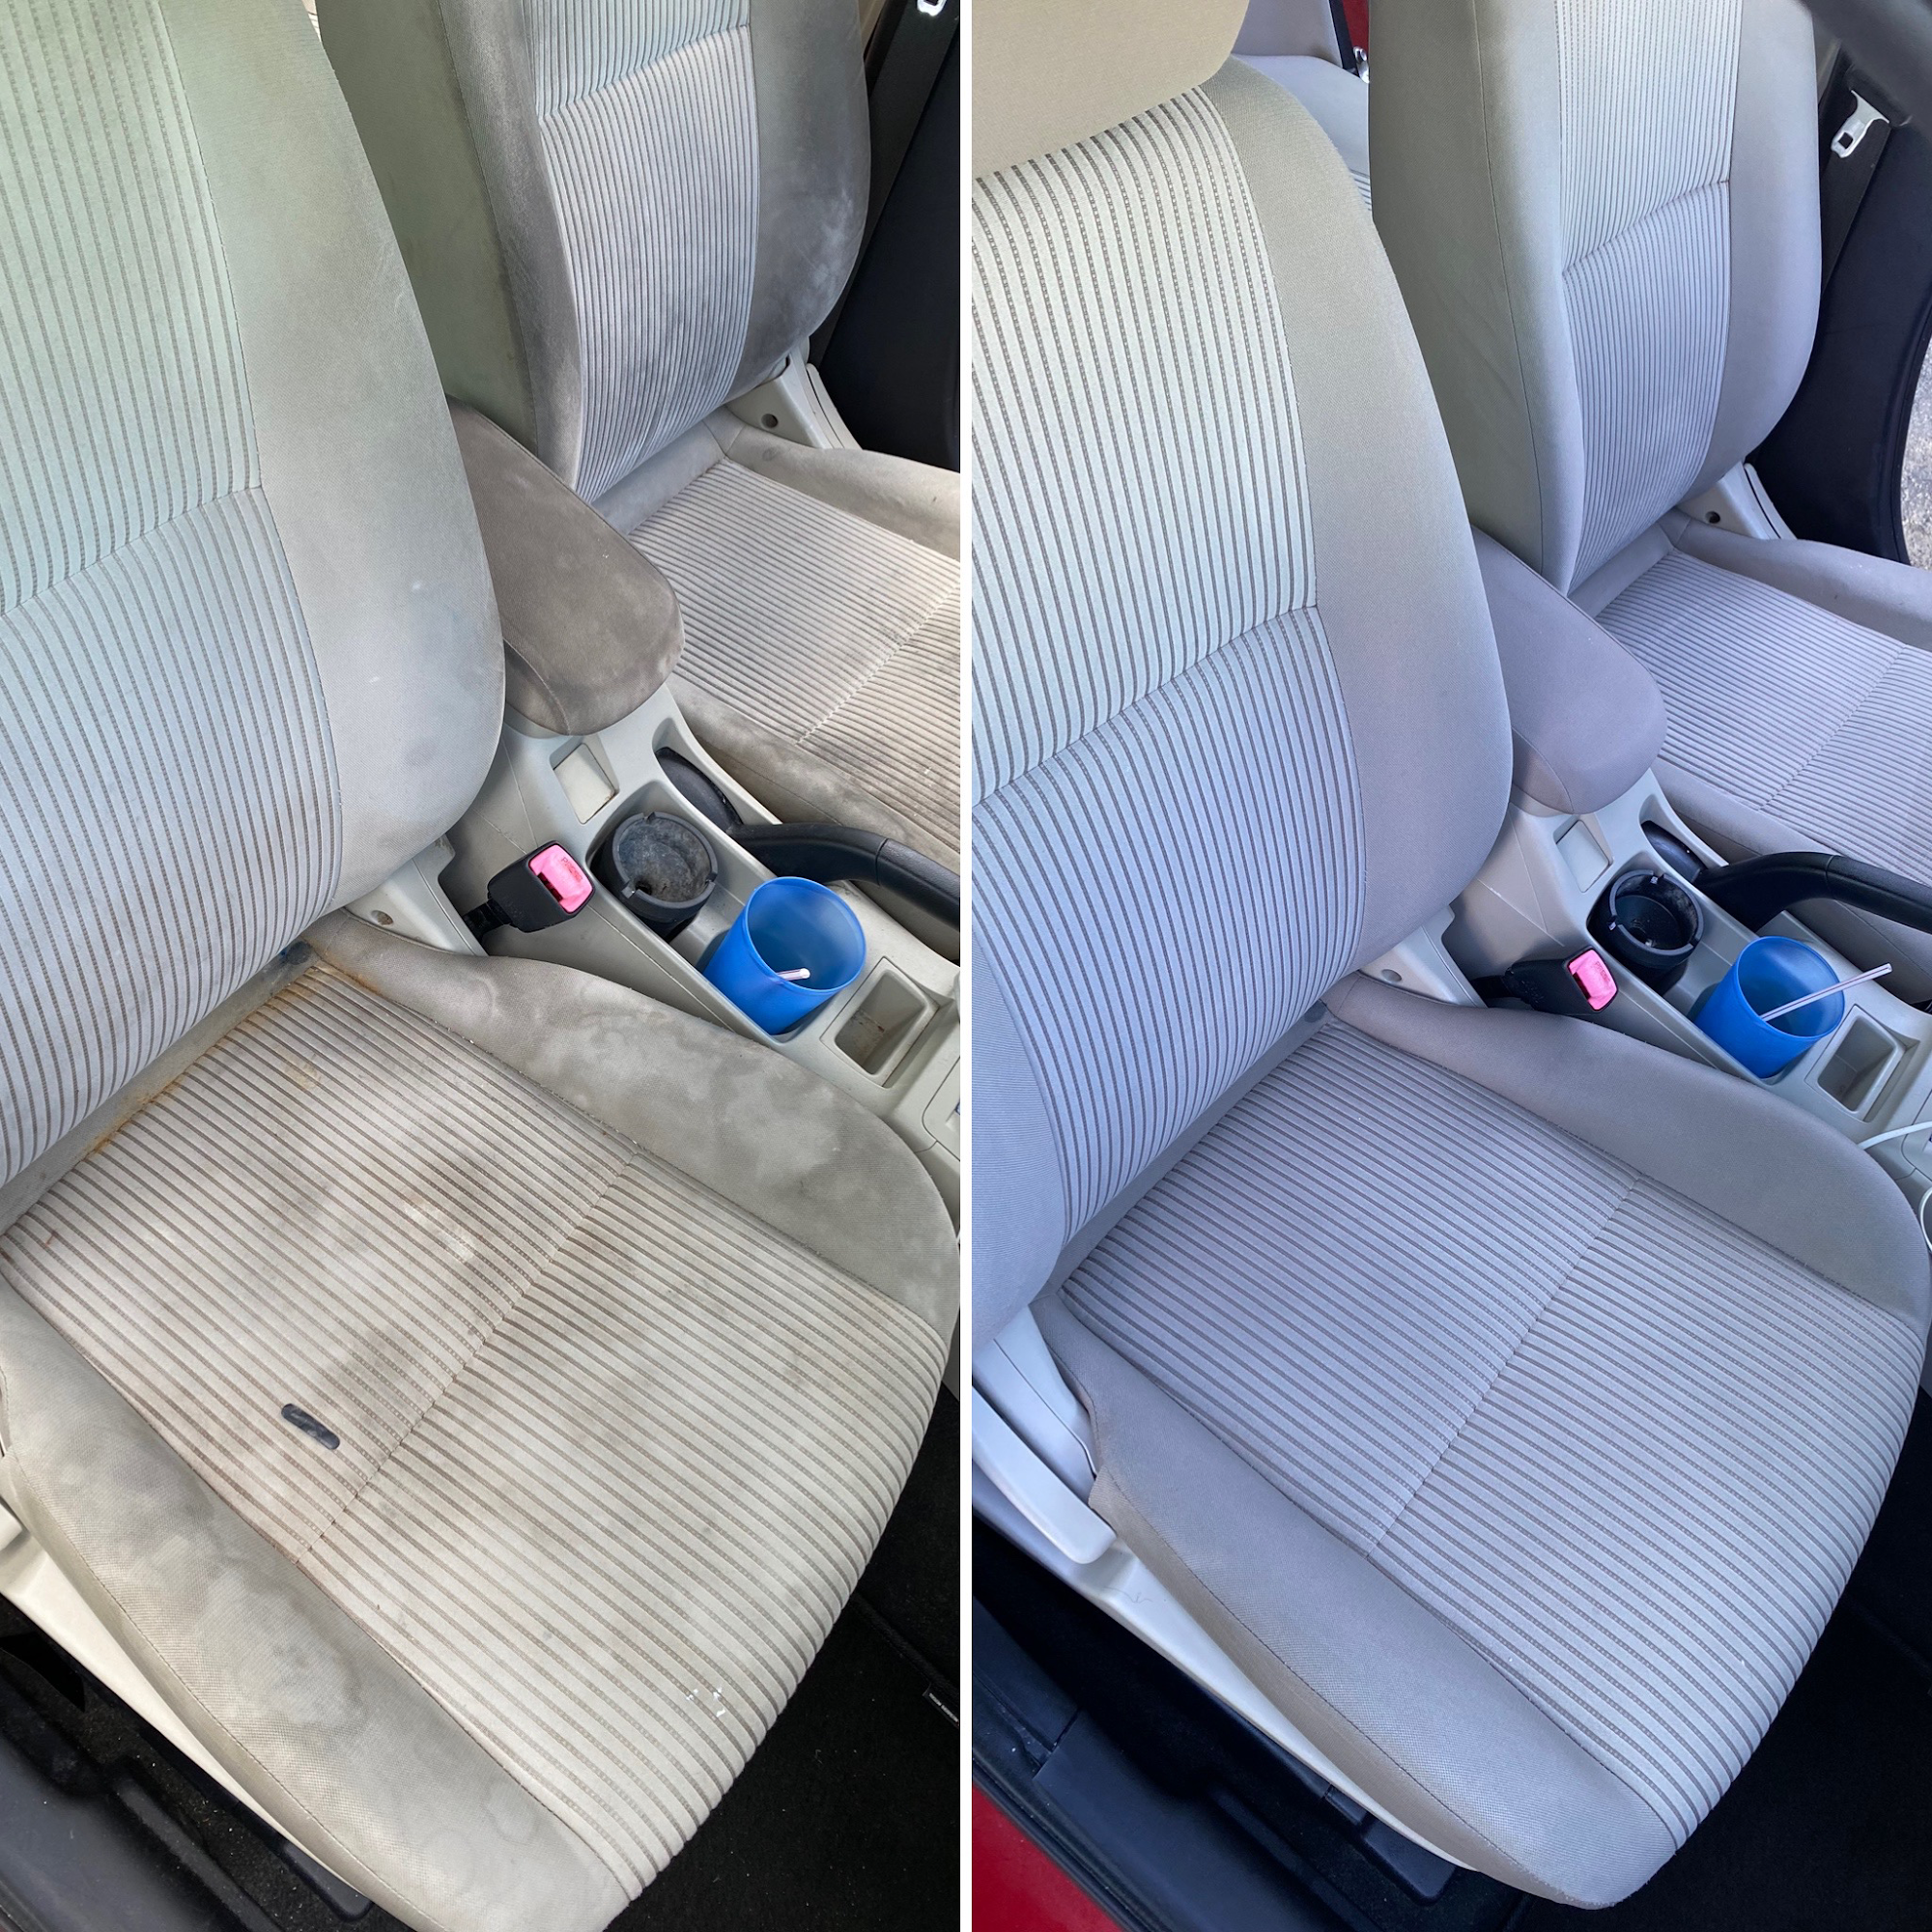 Pro Deep Cleaning LLC -Carpet & Upholstery Cleaning and Auto Interior Detailing